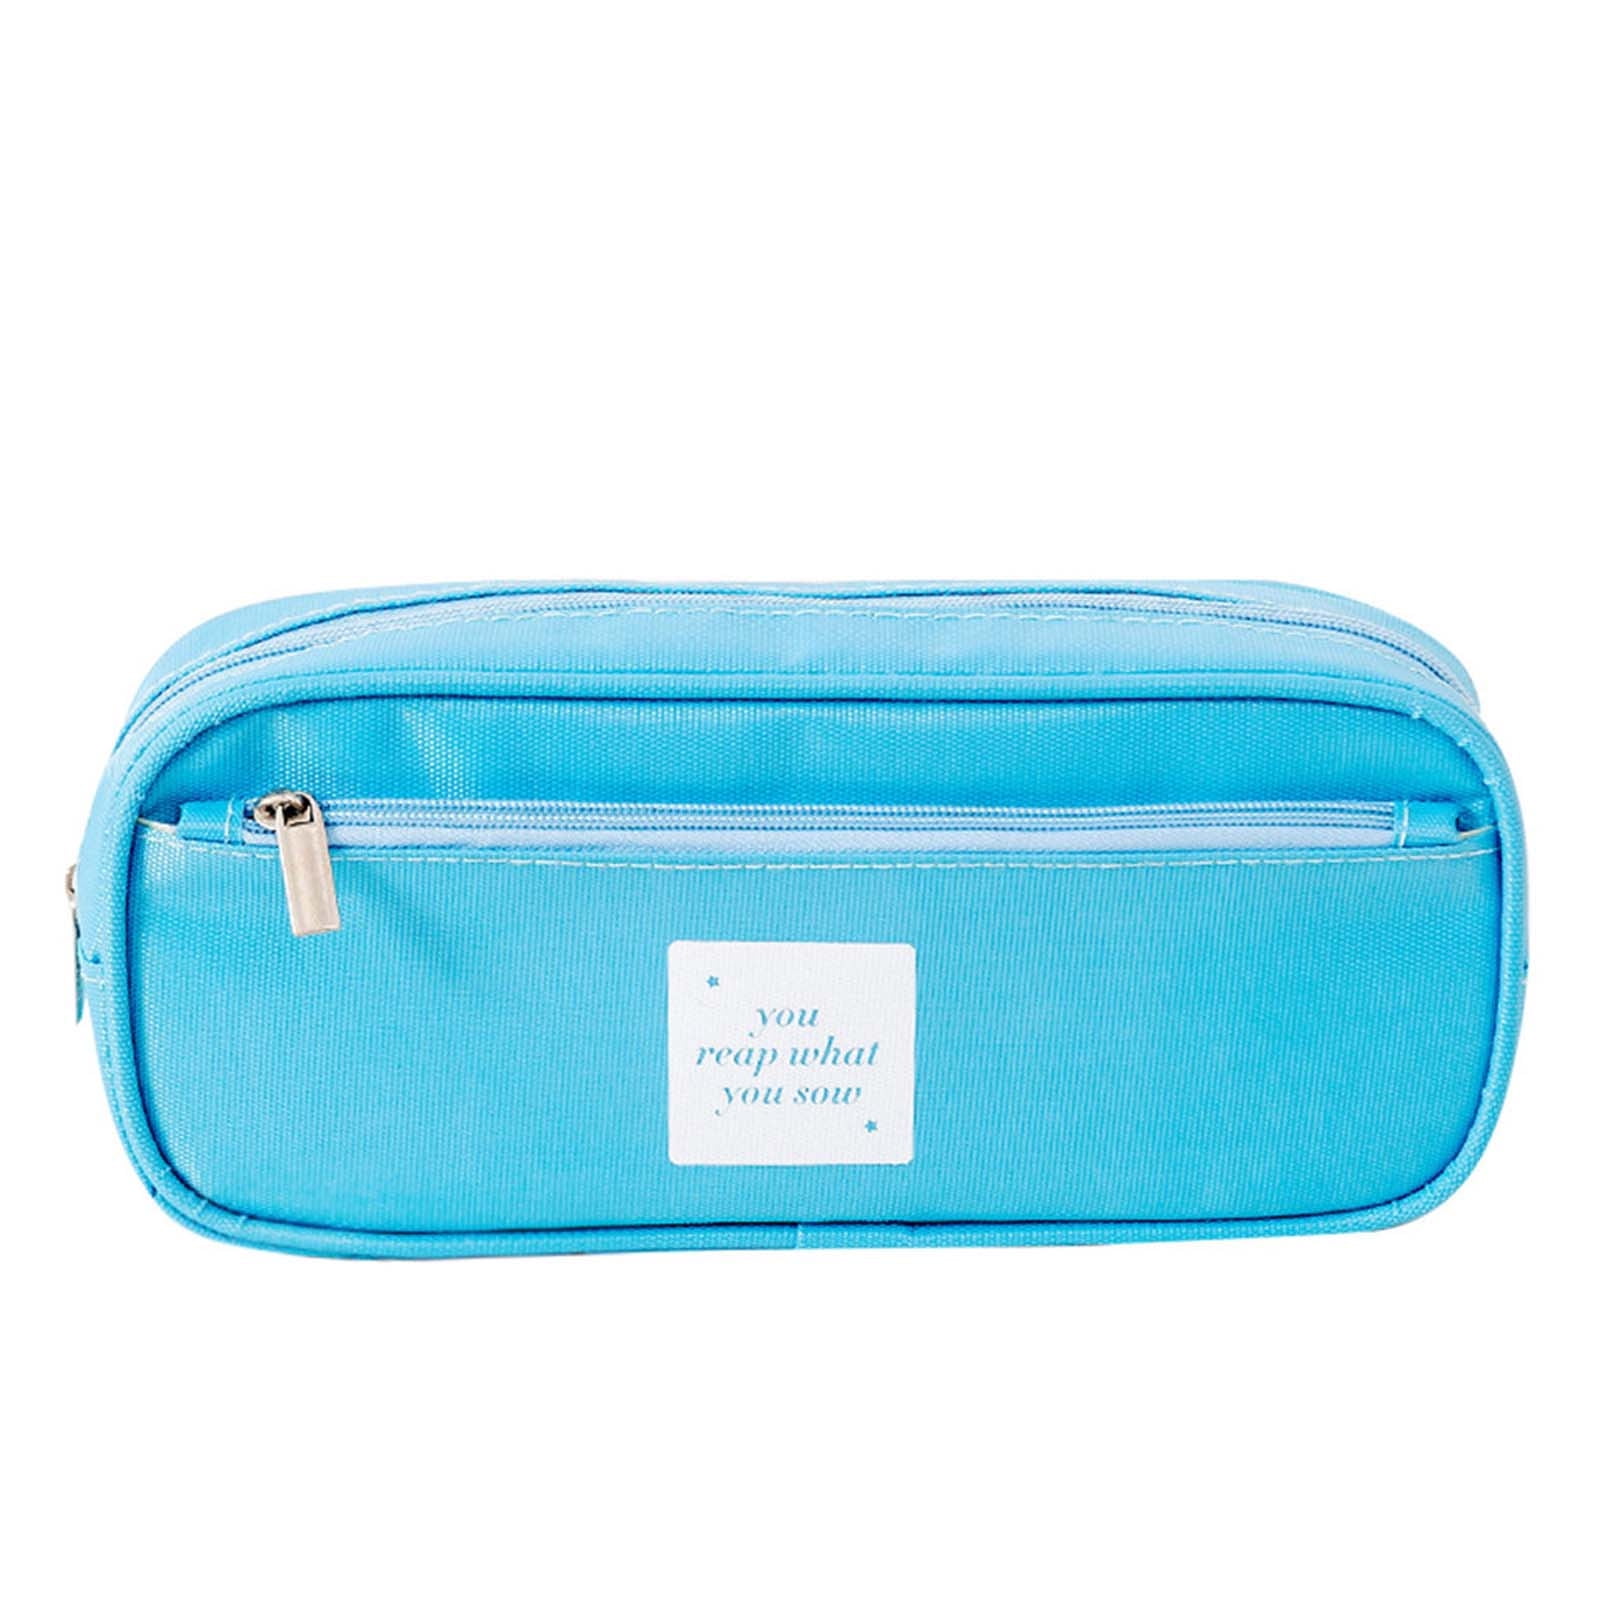 Pencil Case Blue for Study or School, Small Pencil Case With